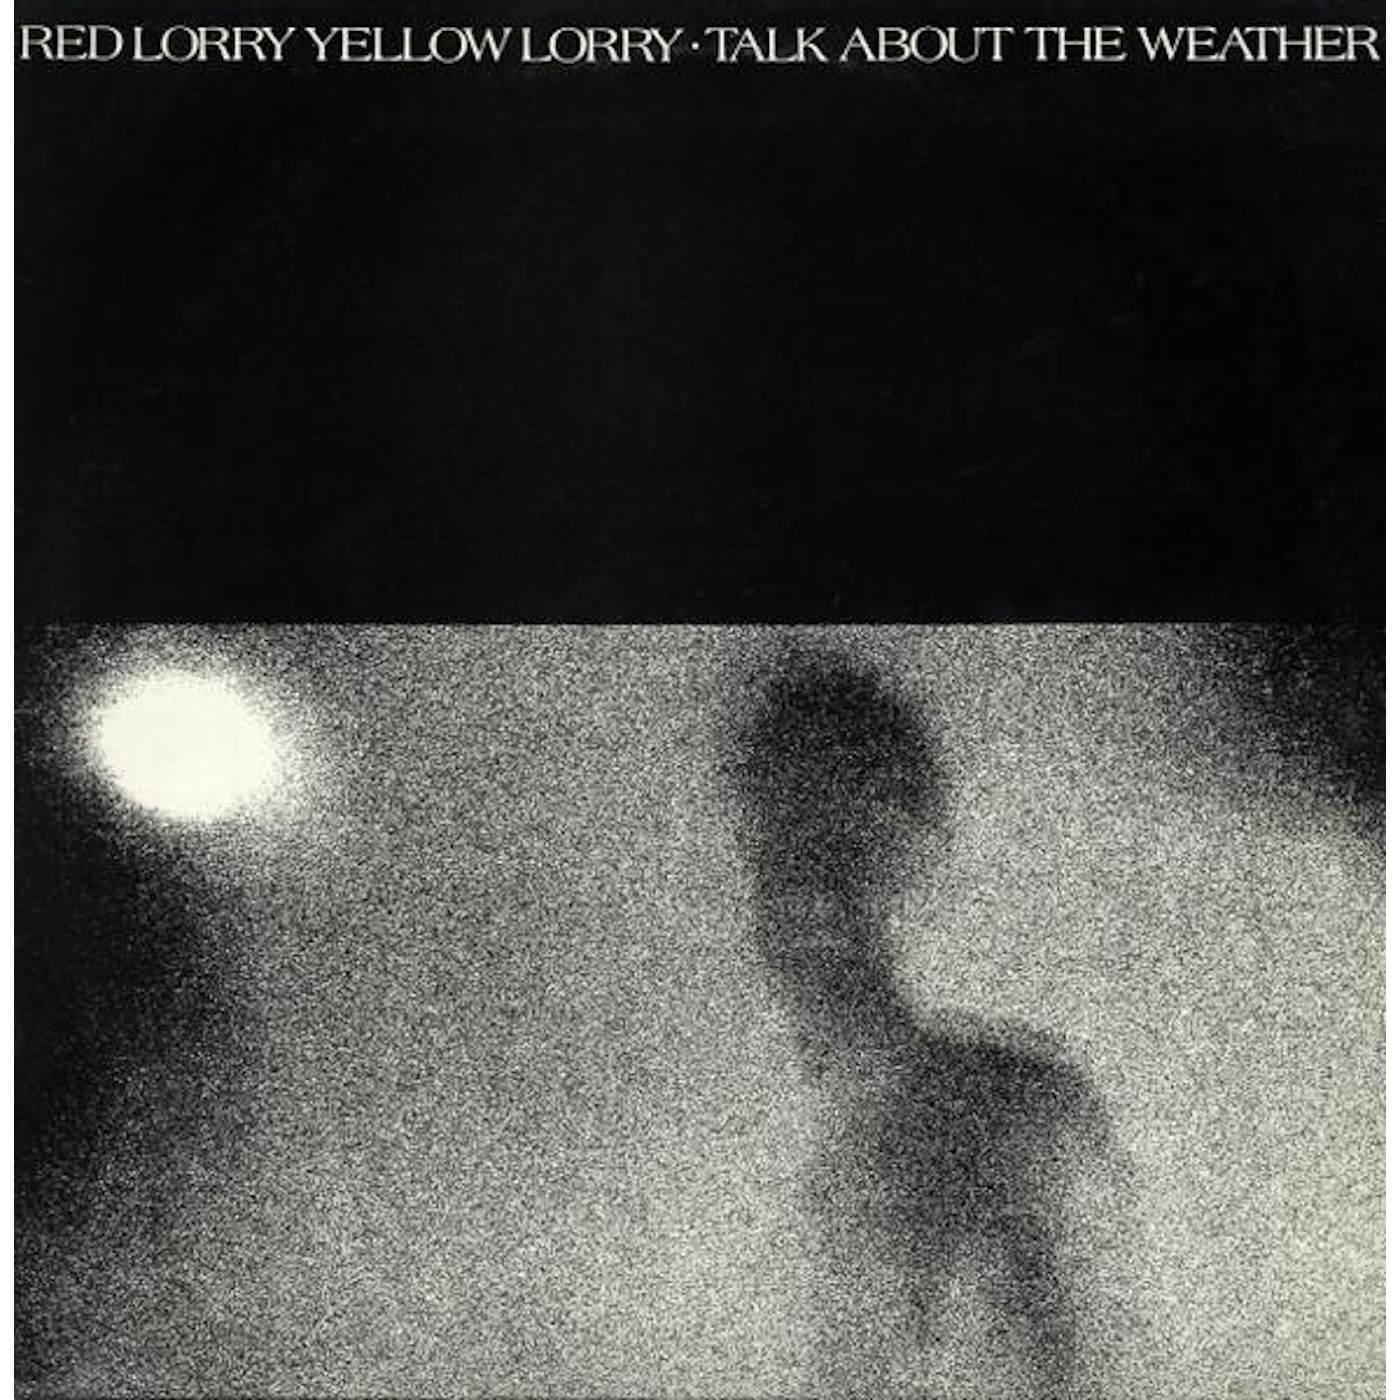 Red Lorry Yellow Lorry Talk About The Weather (White) Vinyl Record